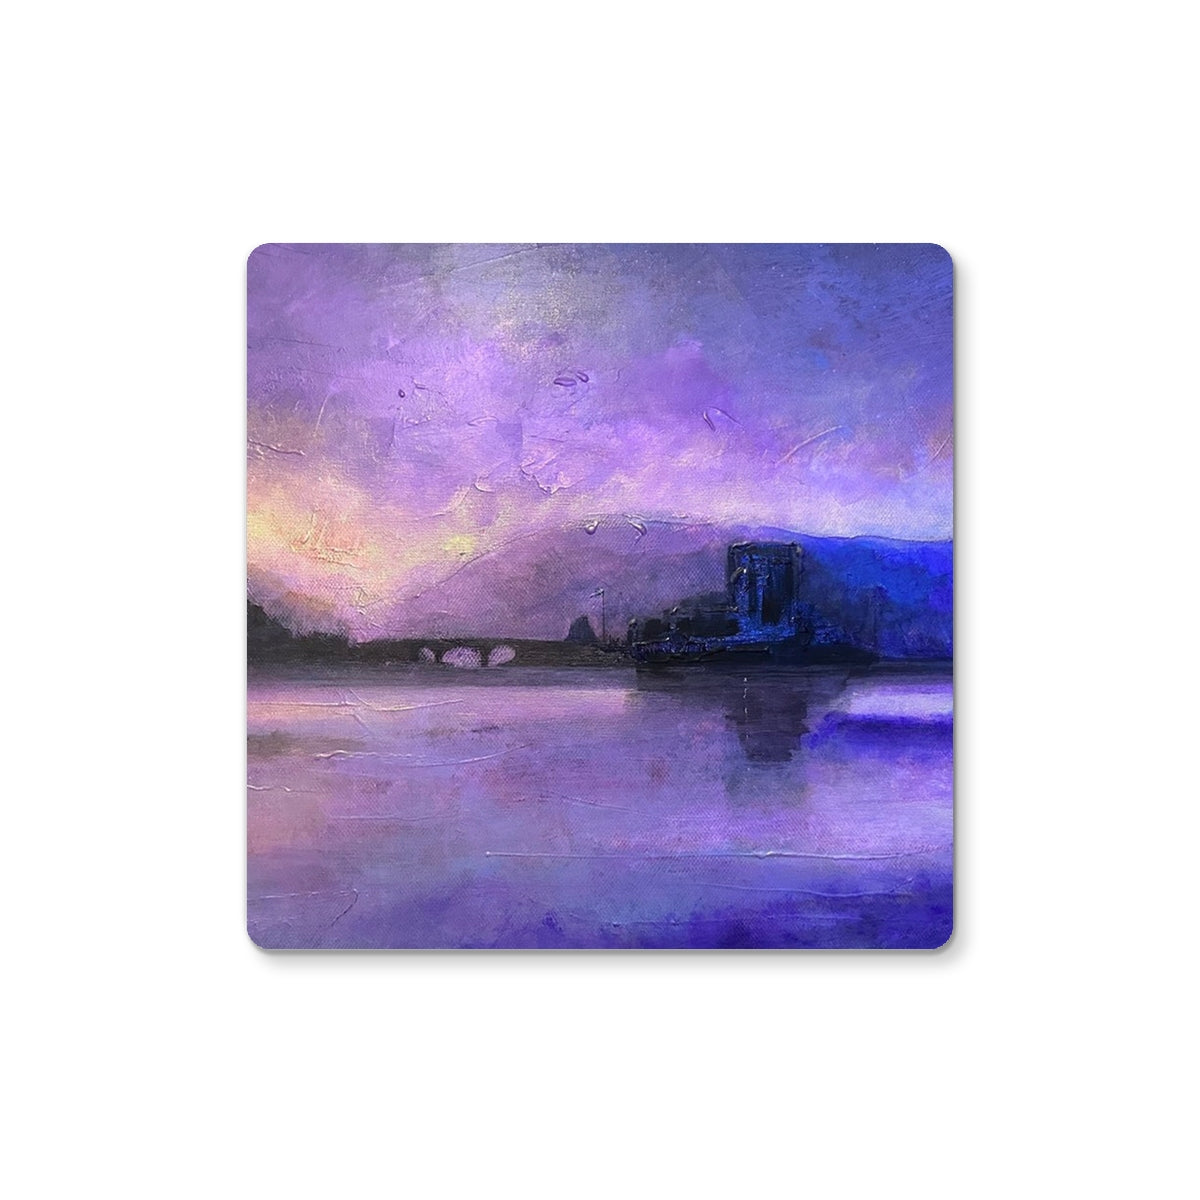 Eilean Donan Castle Moonset Art Gifts Coaster-Coasters-Historic & Iconic Scotland Art Gallery-6 Coasters-Paintings, Prints, Homeware, Art Gifts From Scotland By Scottish Artist Kevin Hunter